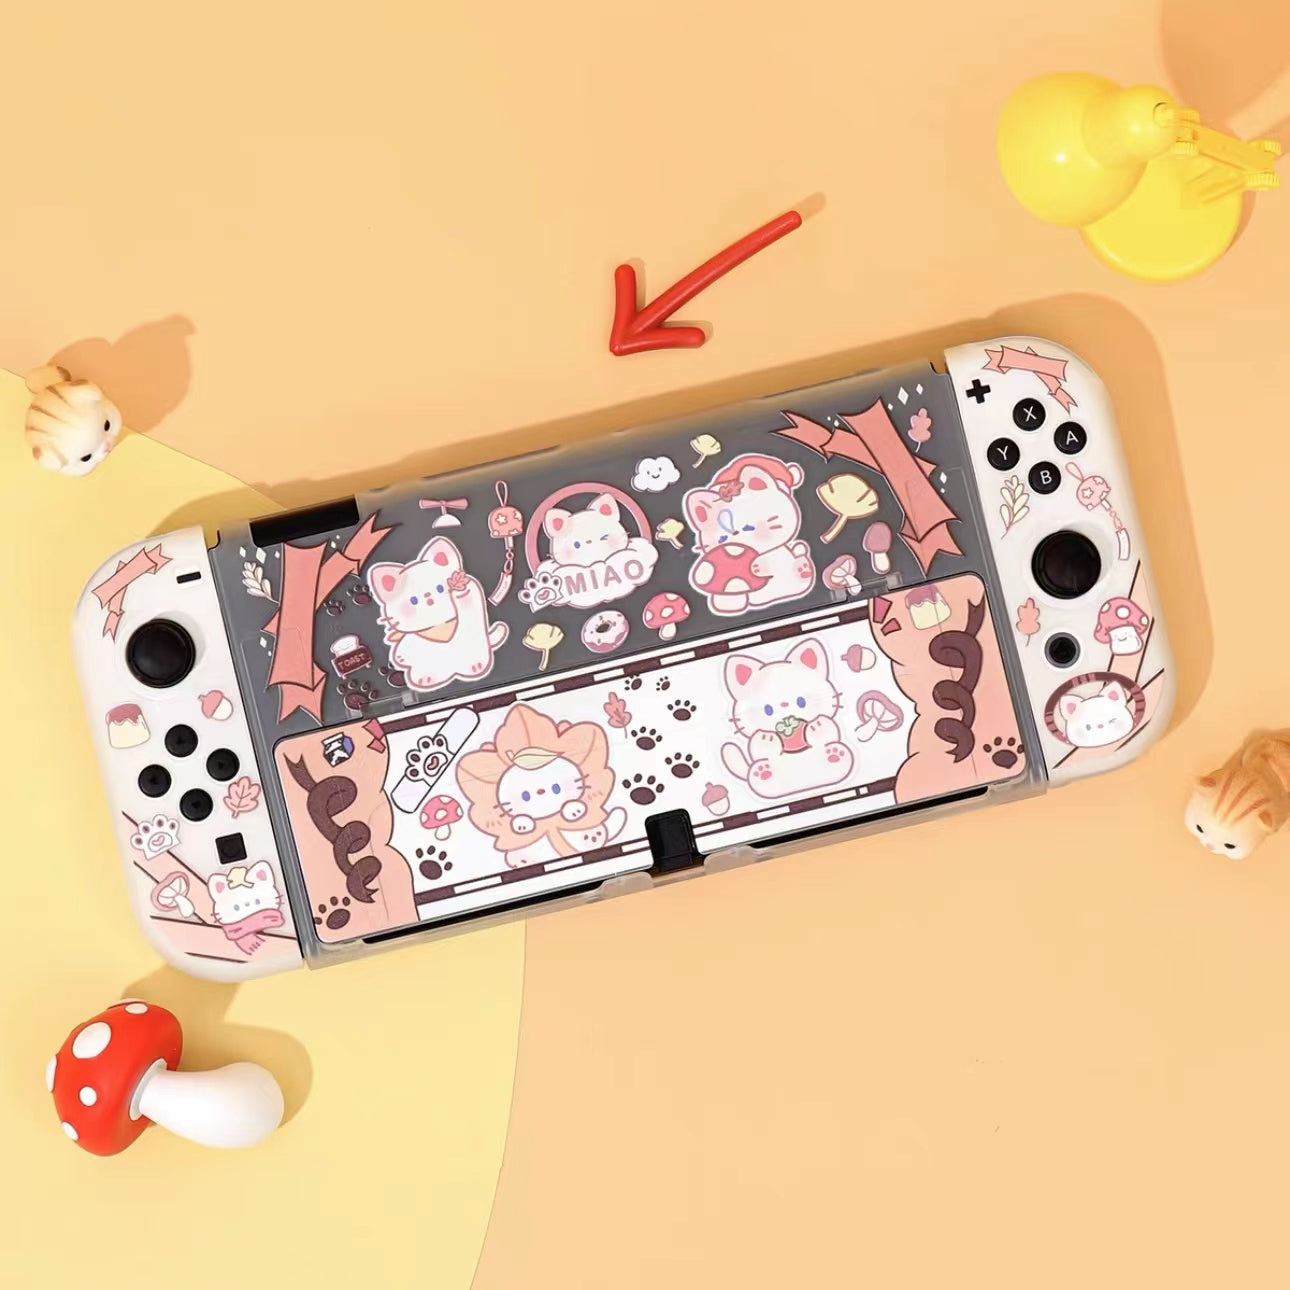 BlingKiyo Kitty Forest Protective Case for Nintendo Switch/ OLED